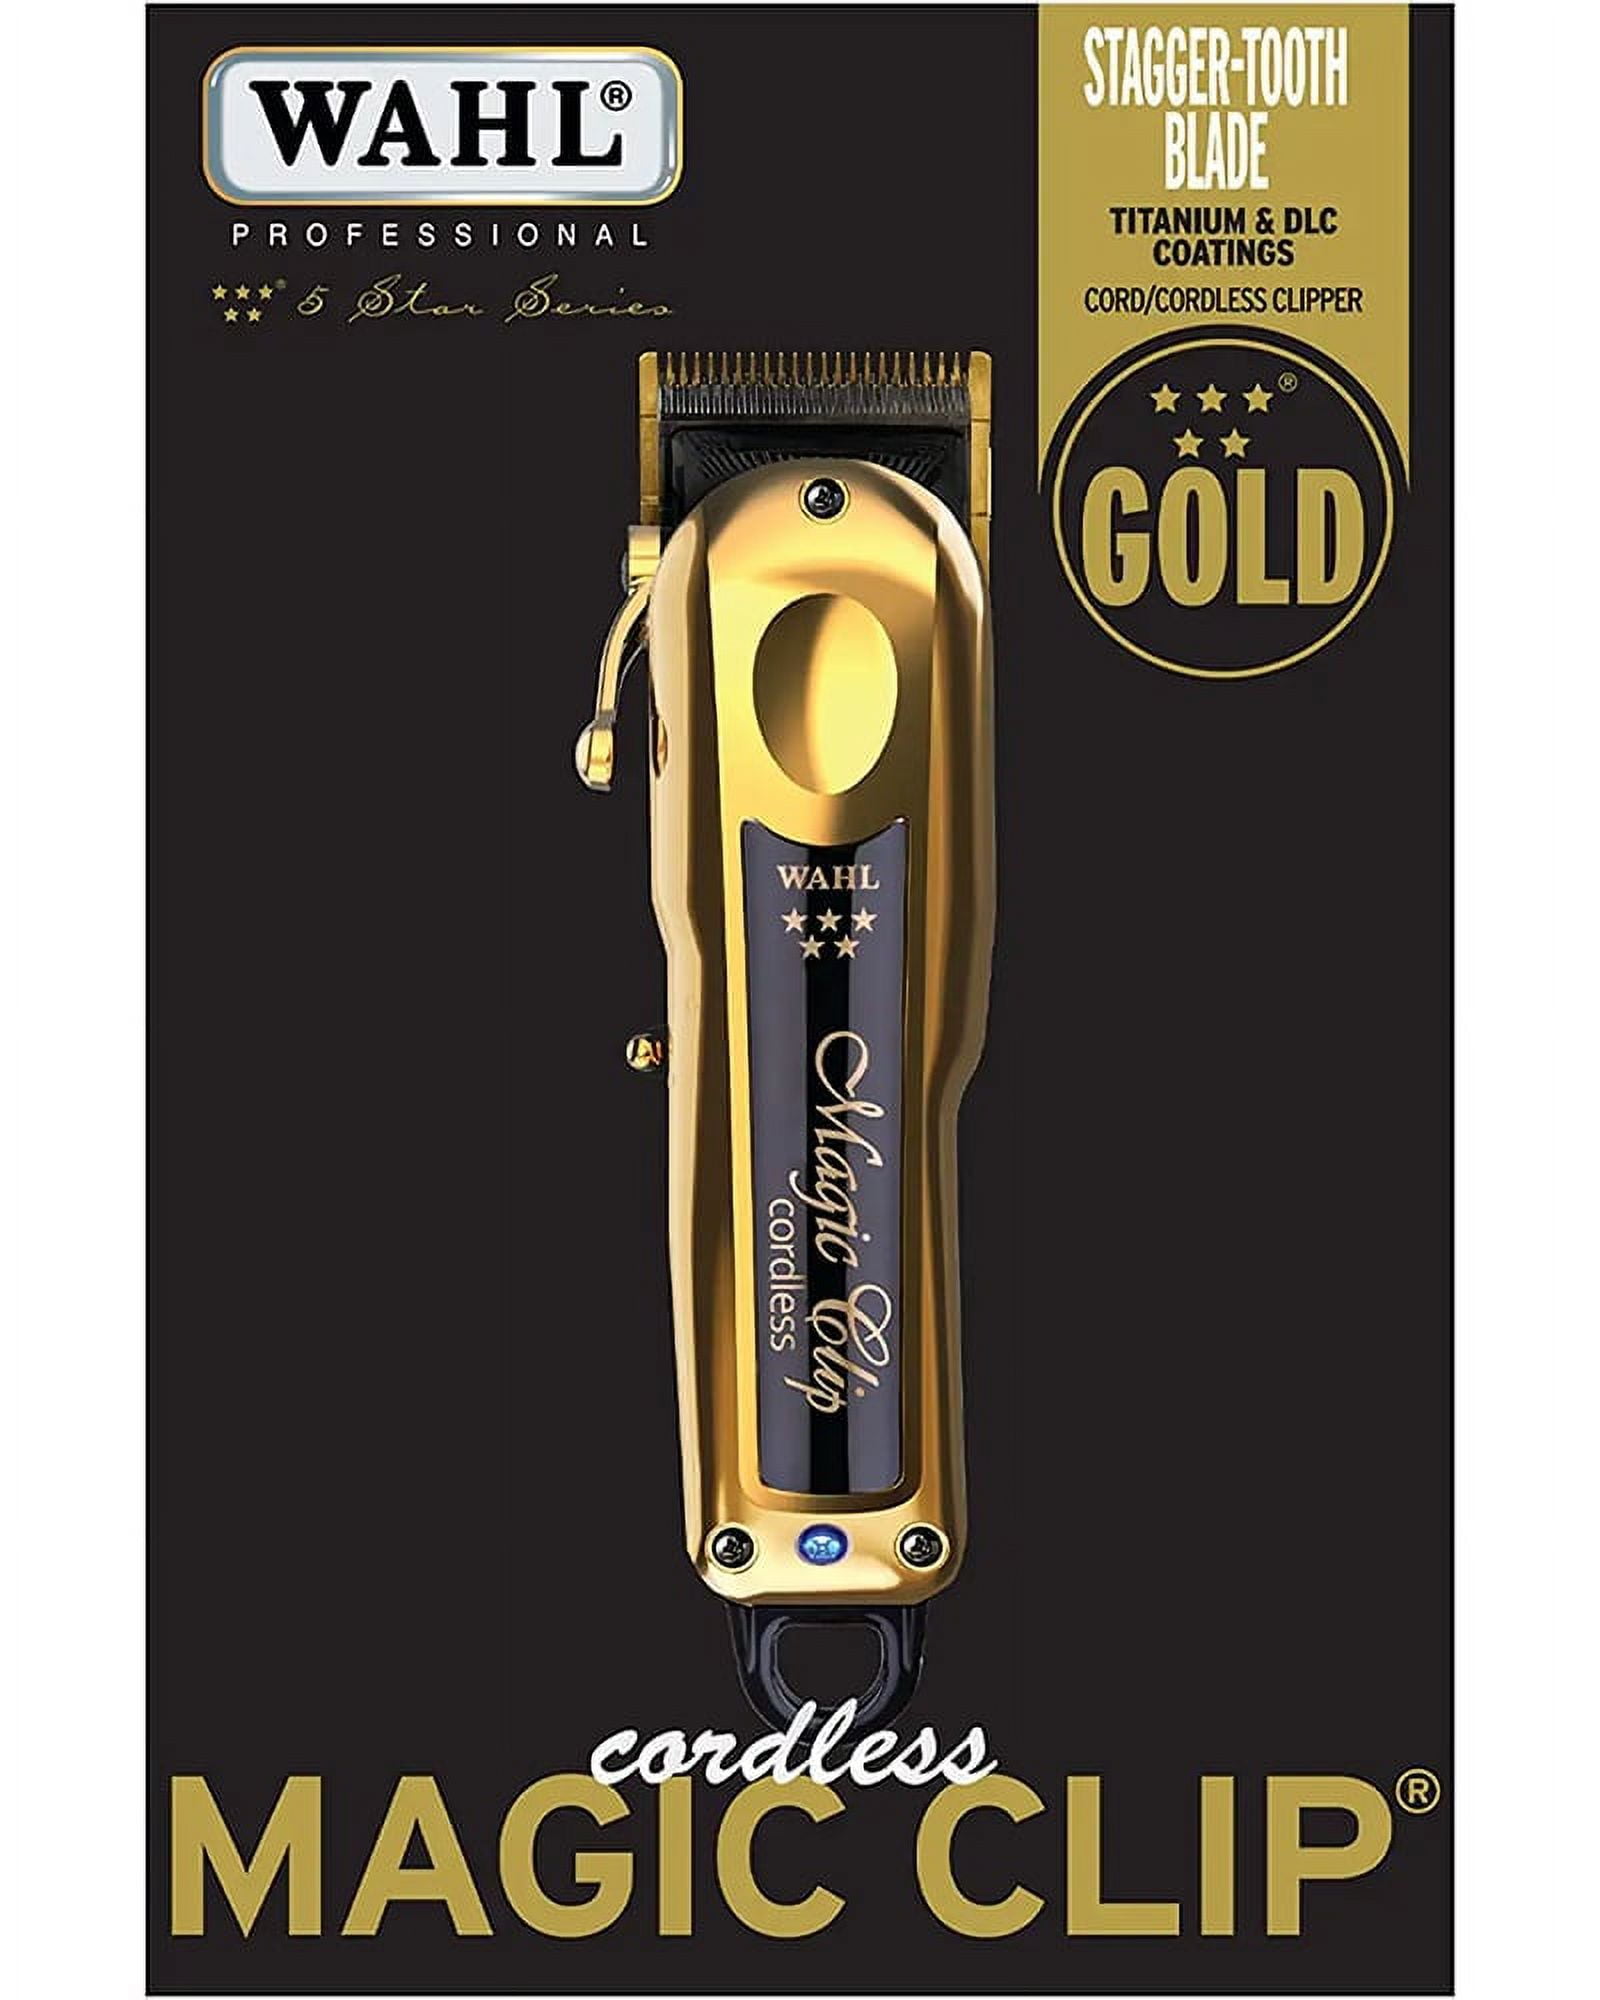  Wahl Professional 5-Star Cord/Cordless Magic Clip #8148 with  Travel Case #90728 : Beauty & Personal Care